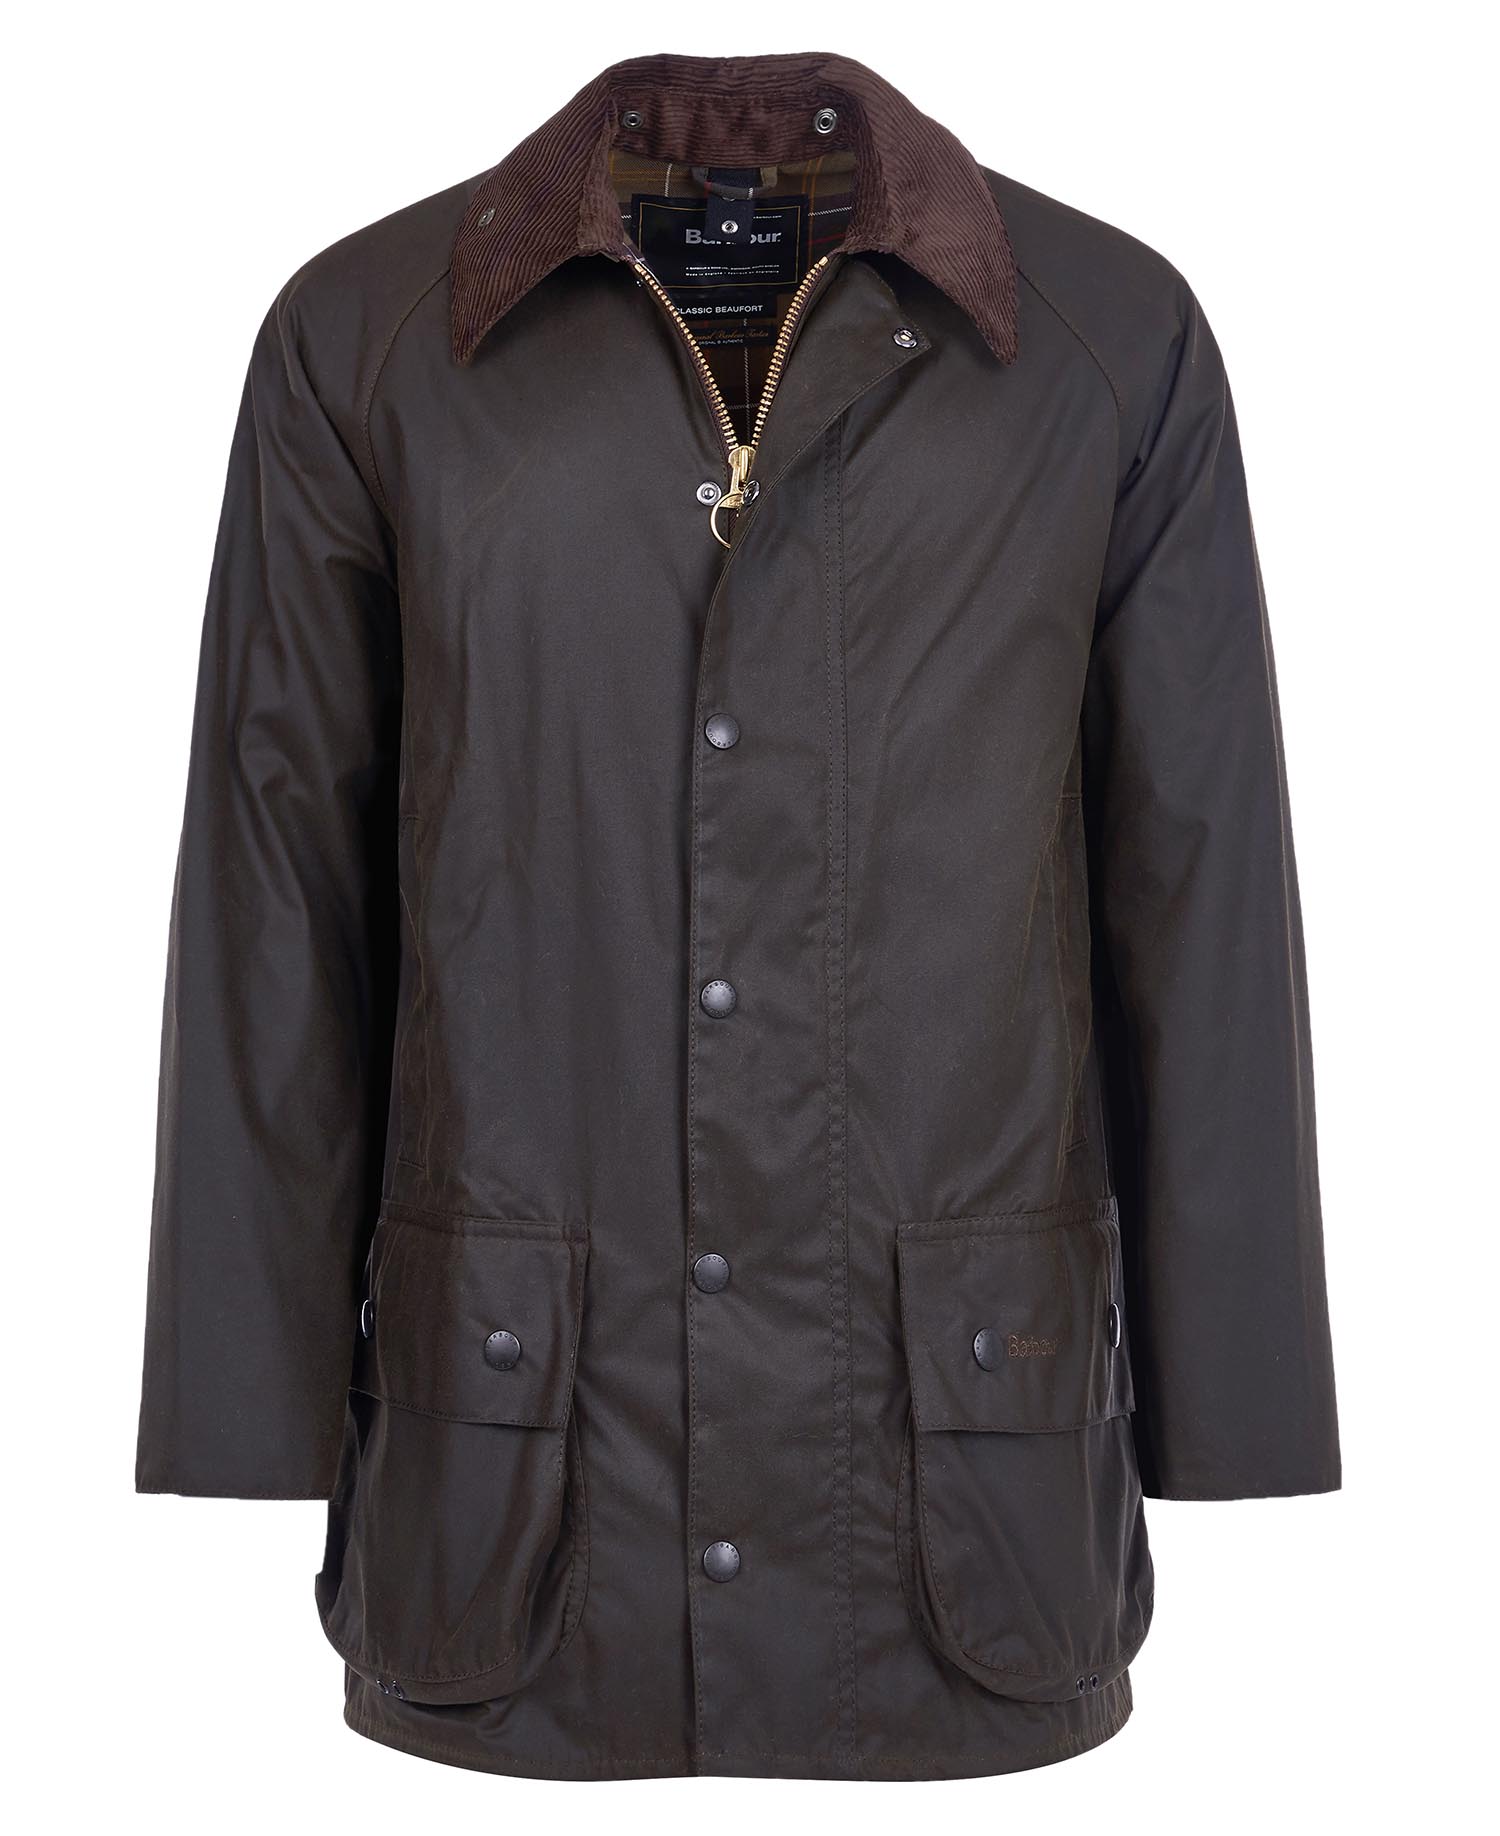 Classic Beaufort Wax Jacket in Olive | Barbour